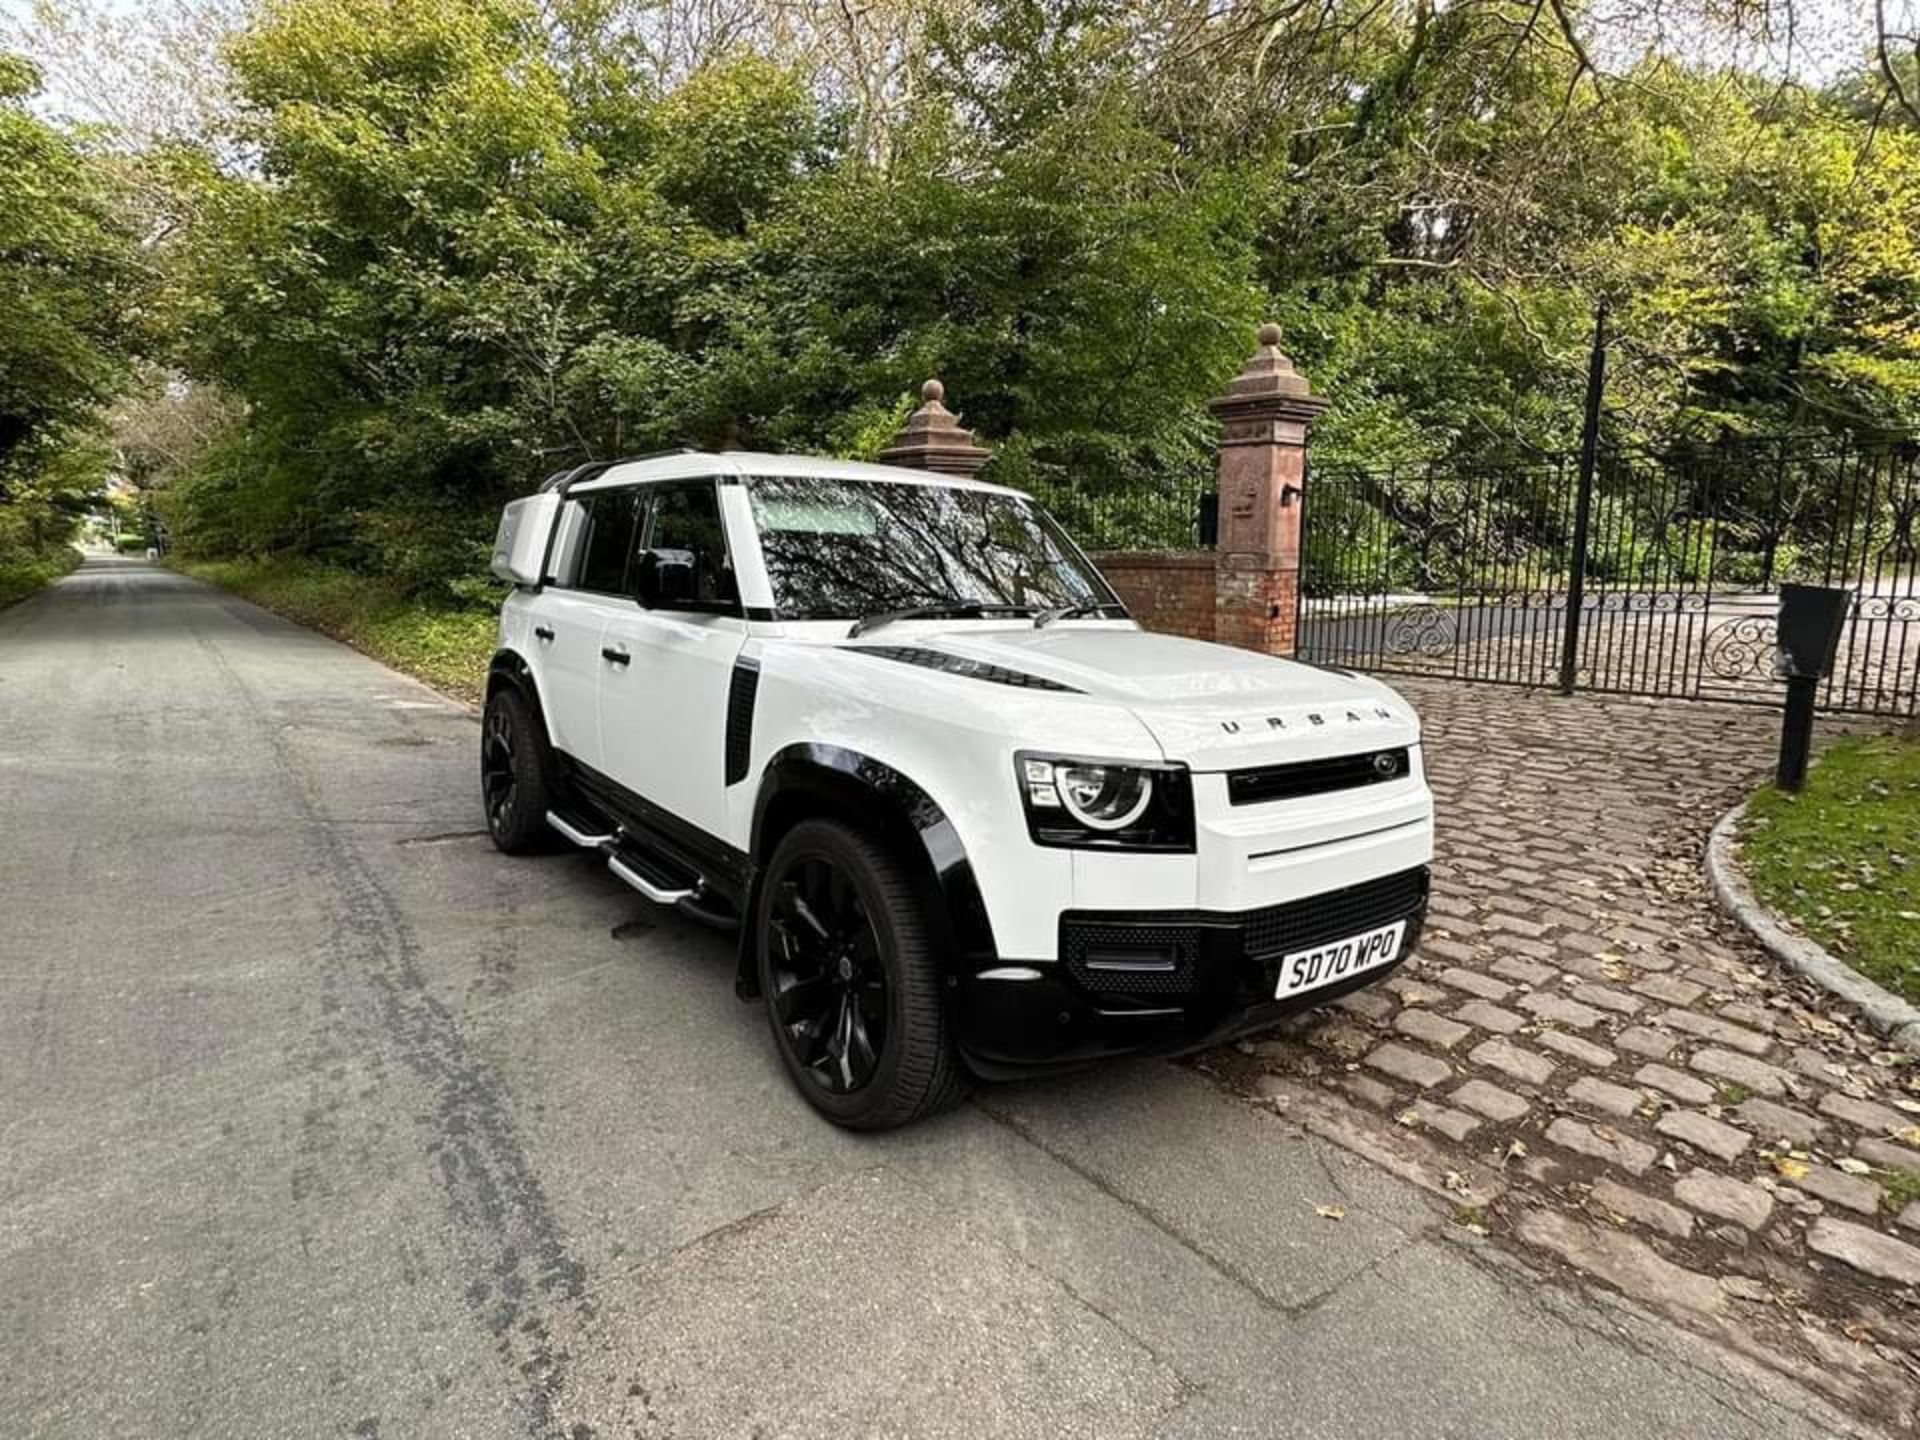 2020/70 REG LAND ROVER DEFENDER 2.0 DIESEL AUTOMATIC, URBAN KITTED - 10K MILES WITH FULL HISTORY